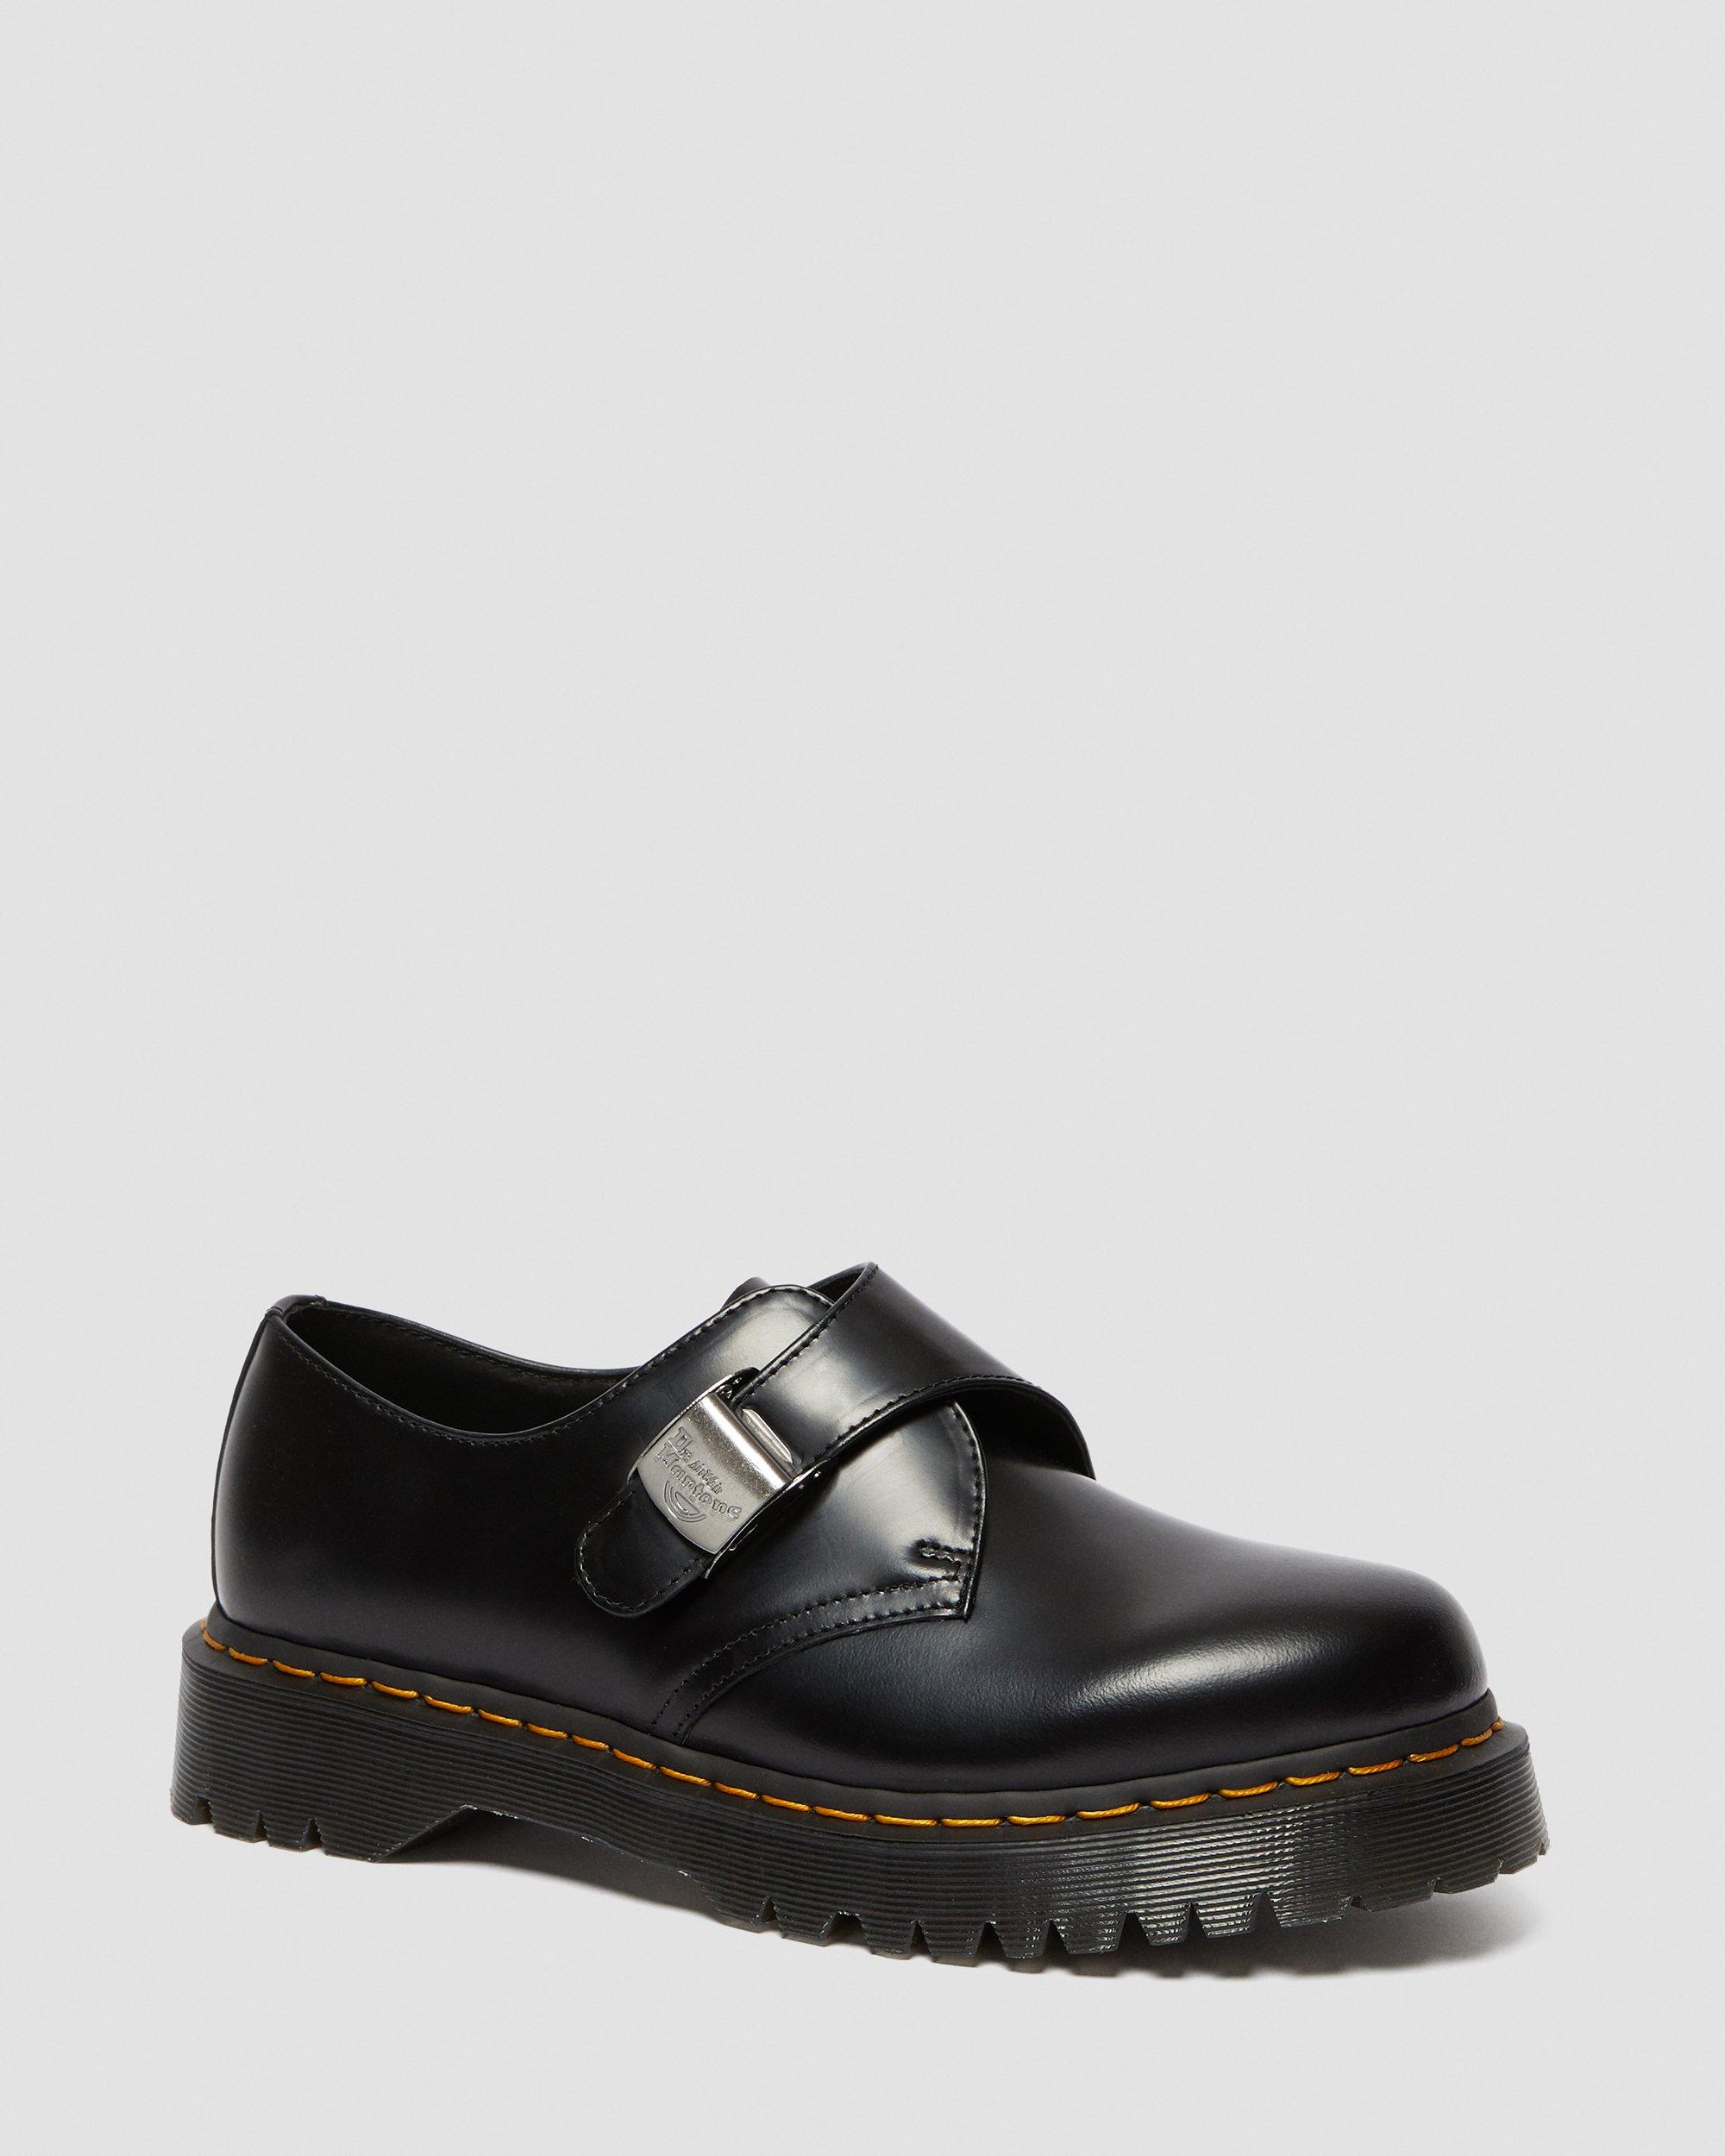 FENIMORE LOW LEATHER SHOES | Dr. Martens UK